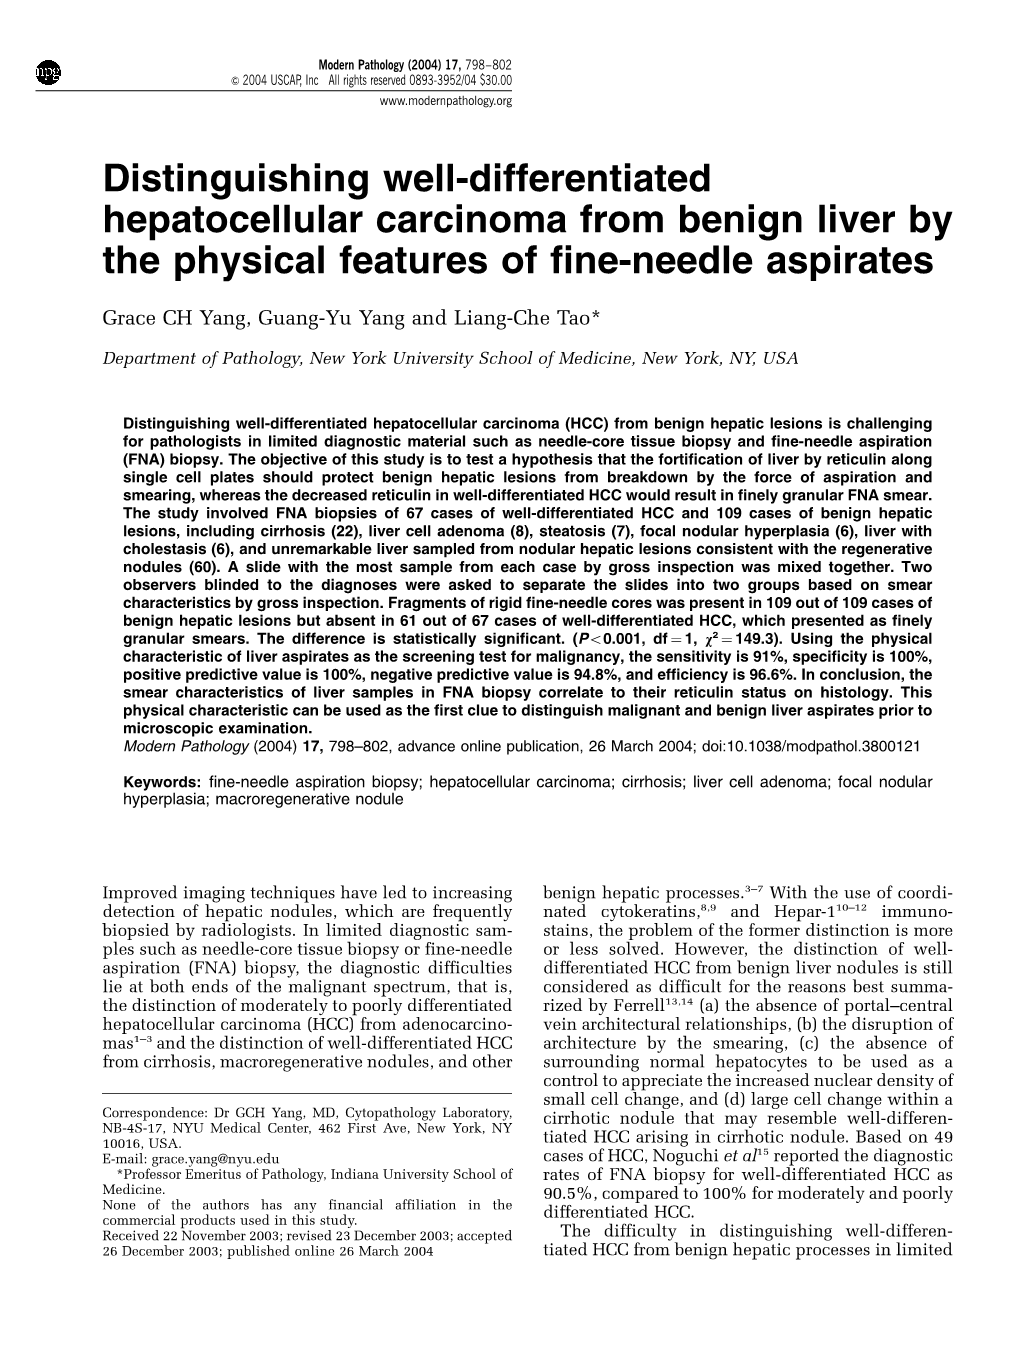 Distinguishing Well-Differentiated Hepatocellular Carcinoma from Benign Liver by the Physical Features of Fine-Needle Aspirates